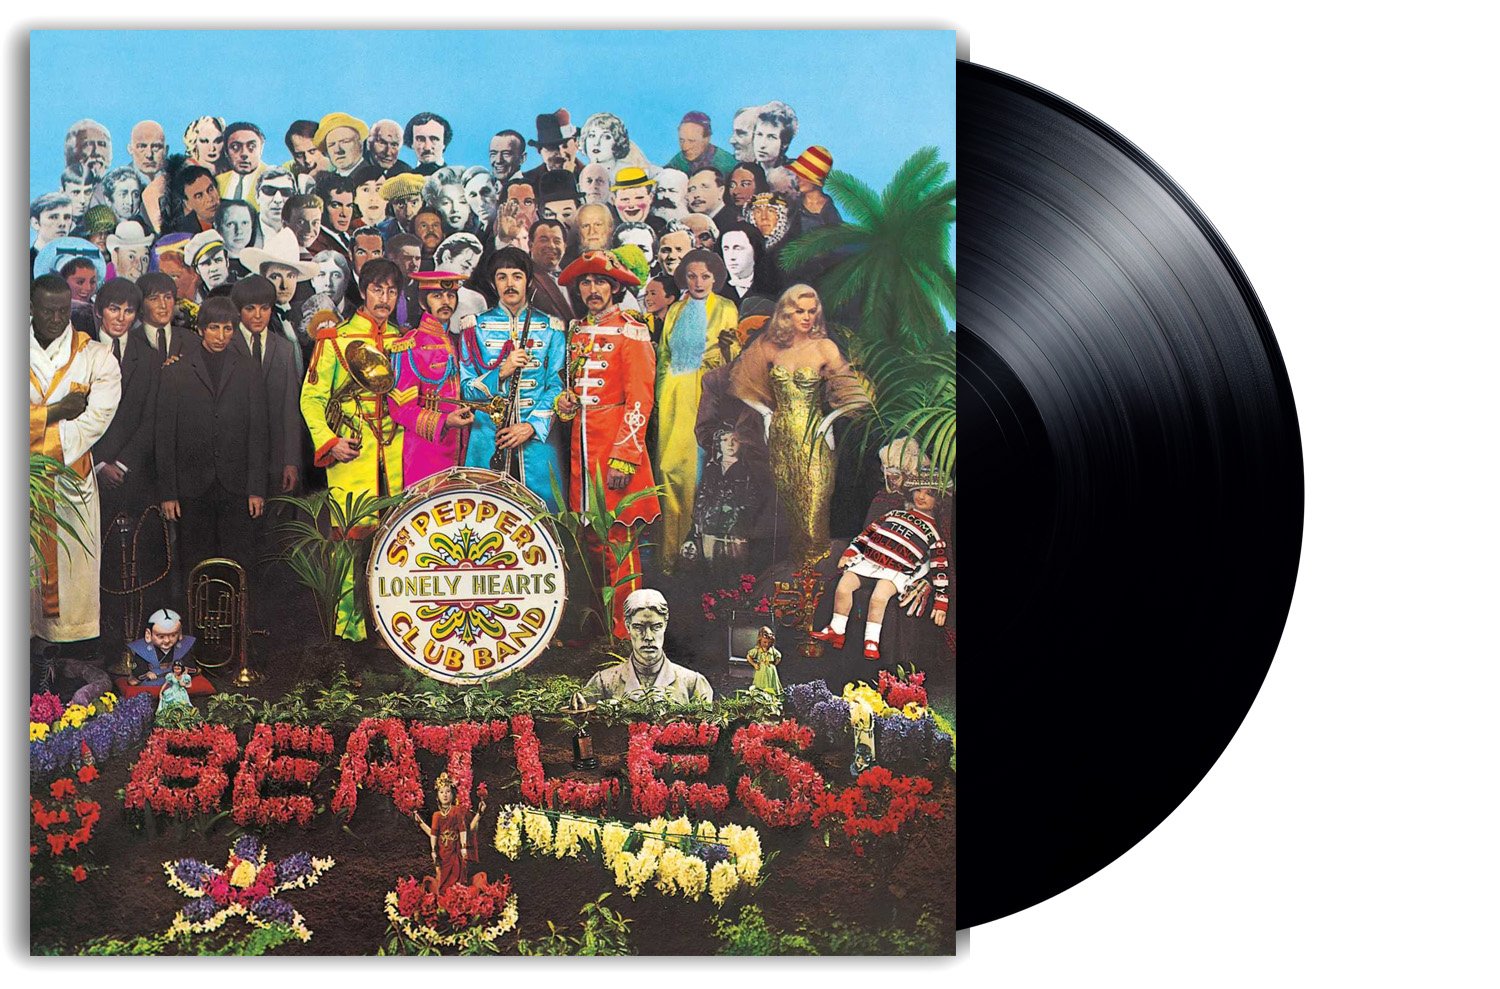 Sgt. Pepper's Lonely Hearts Club Band Vinilo